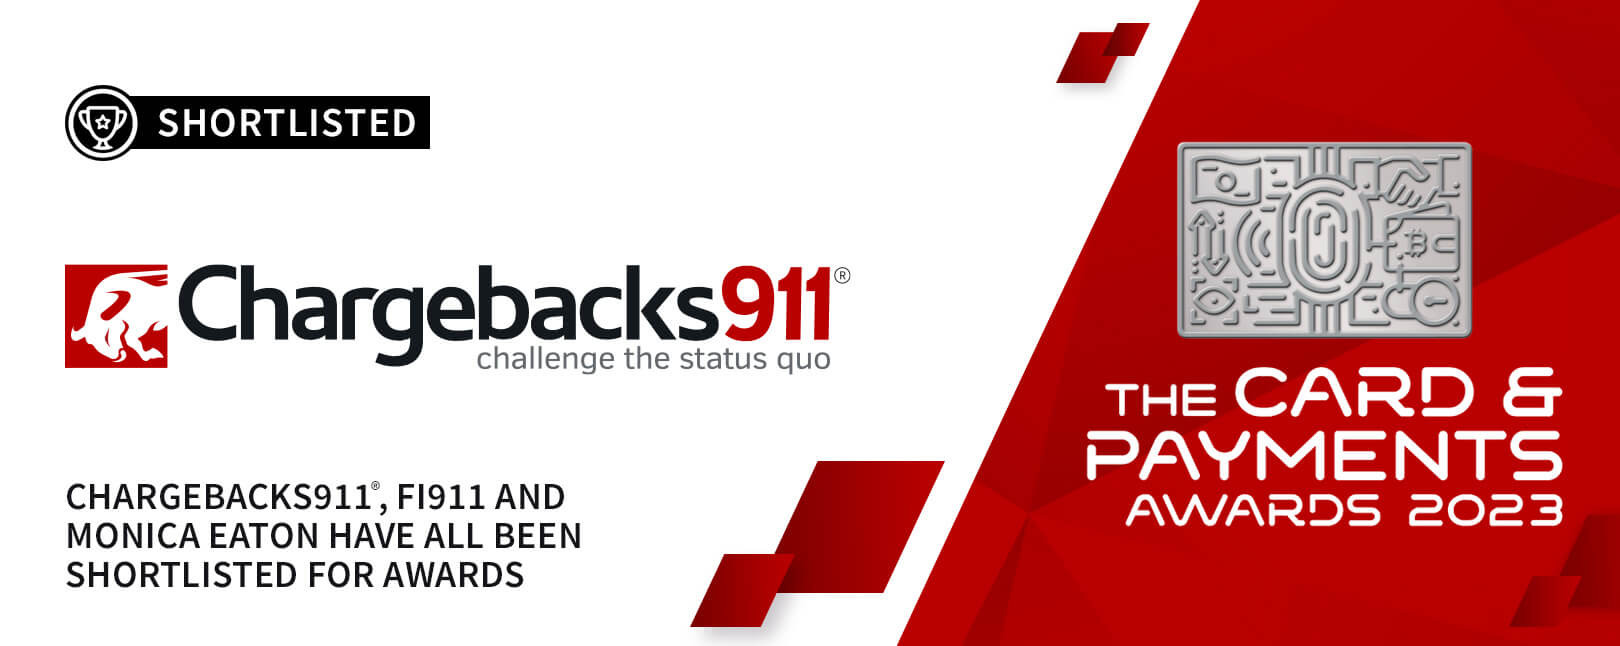 Chargebacks911® Recognized as “Best Security or Anti-Fraud Development” for 2023!